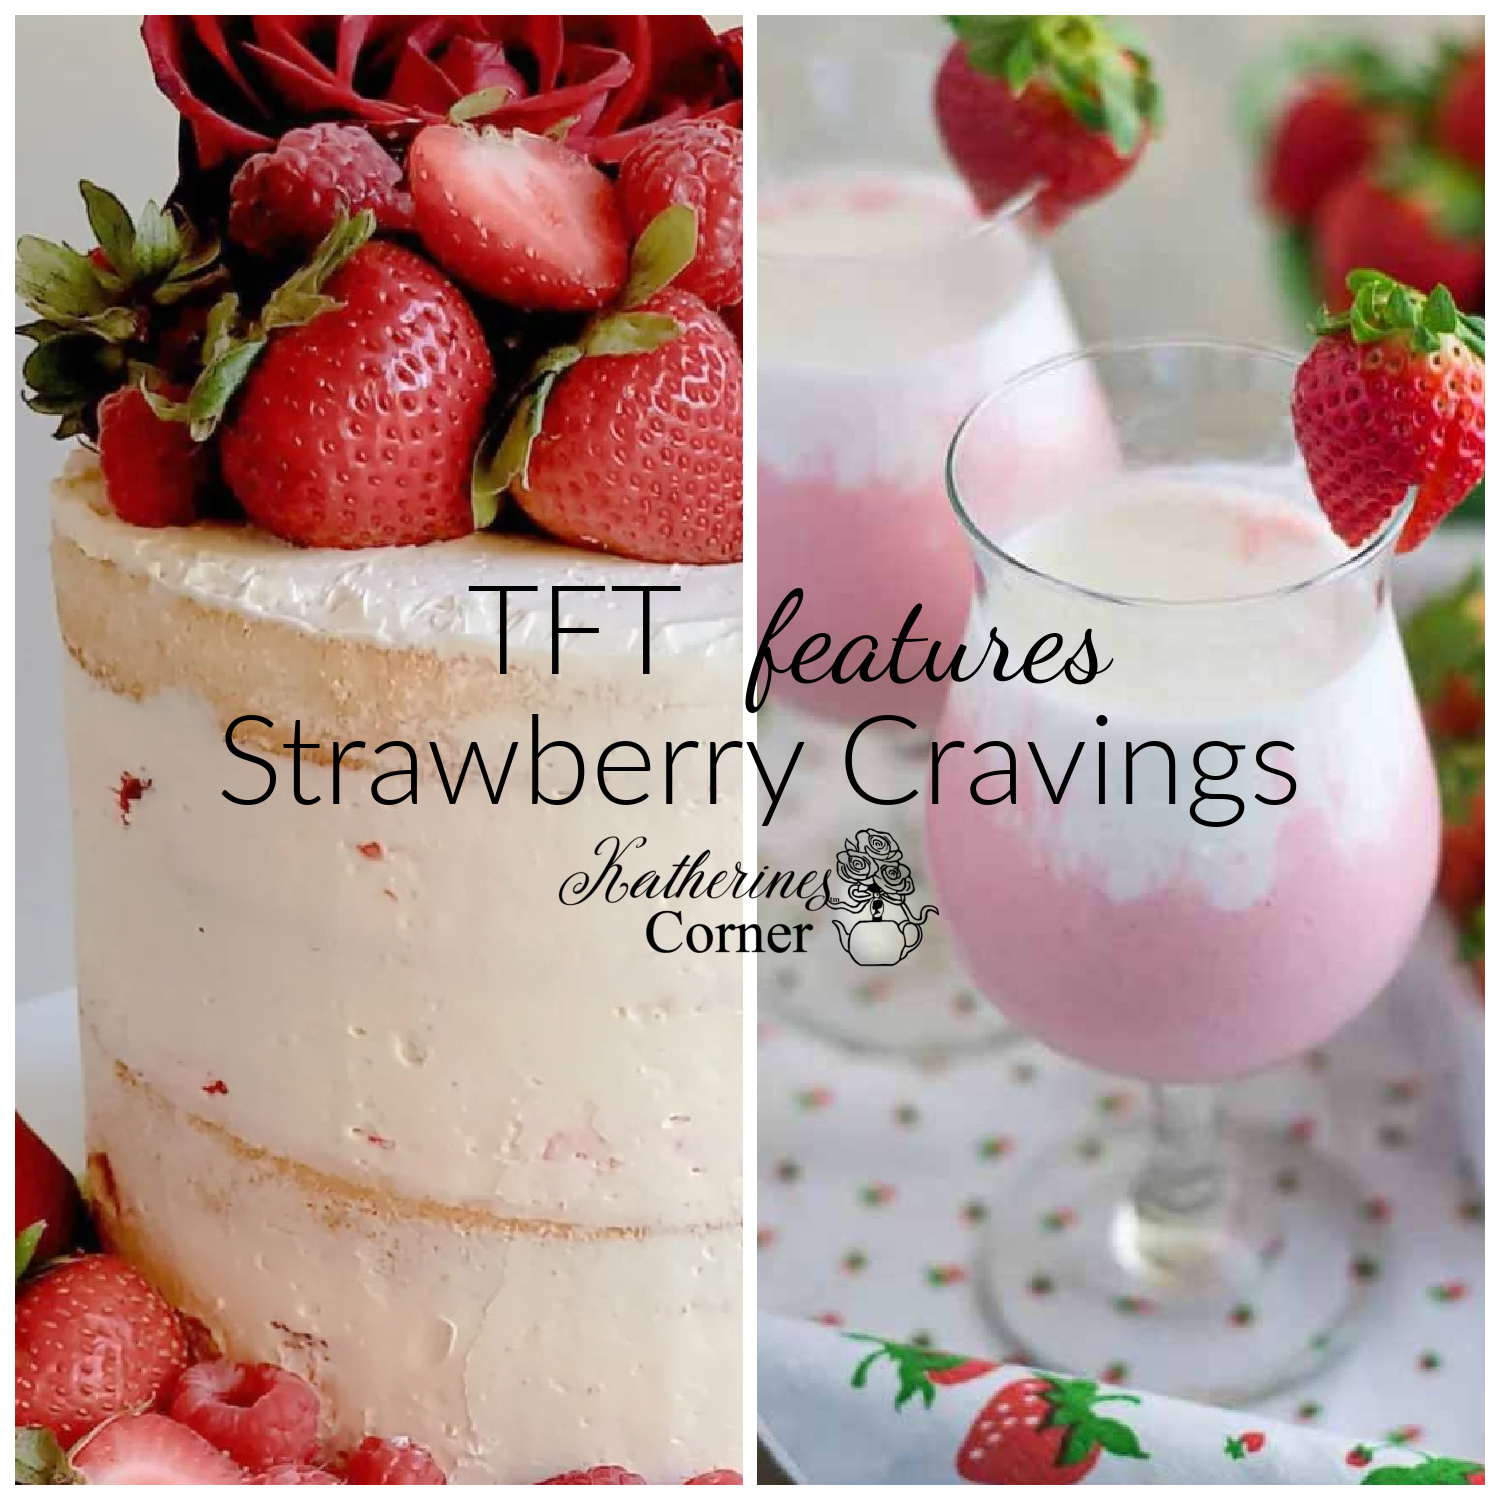 Strawberry Cravings and the TFT Blog hop